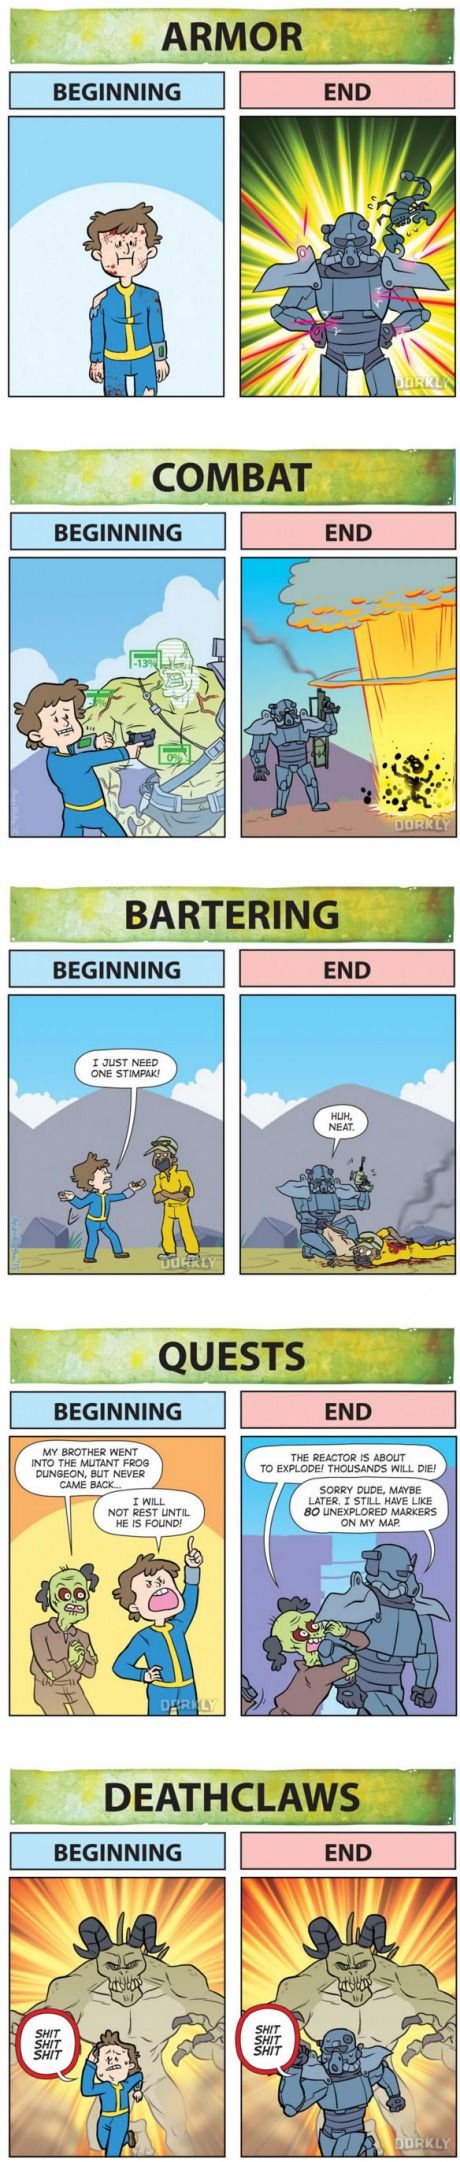 Fallout: Beginning Vs. End